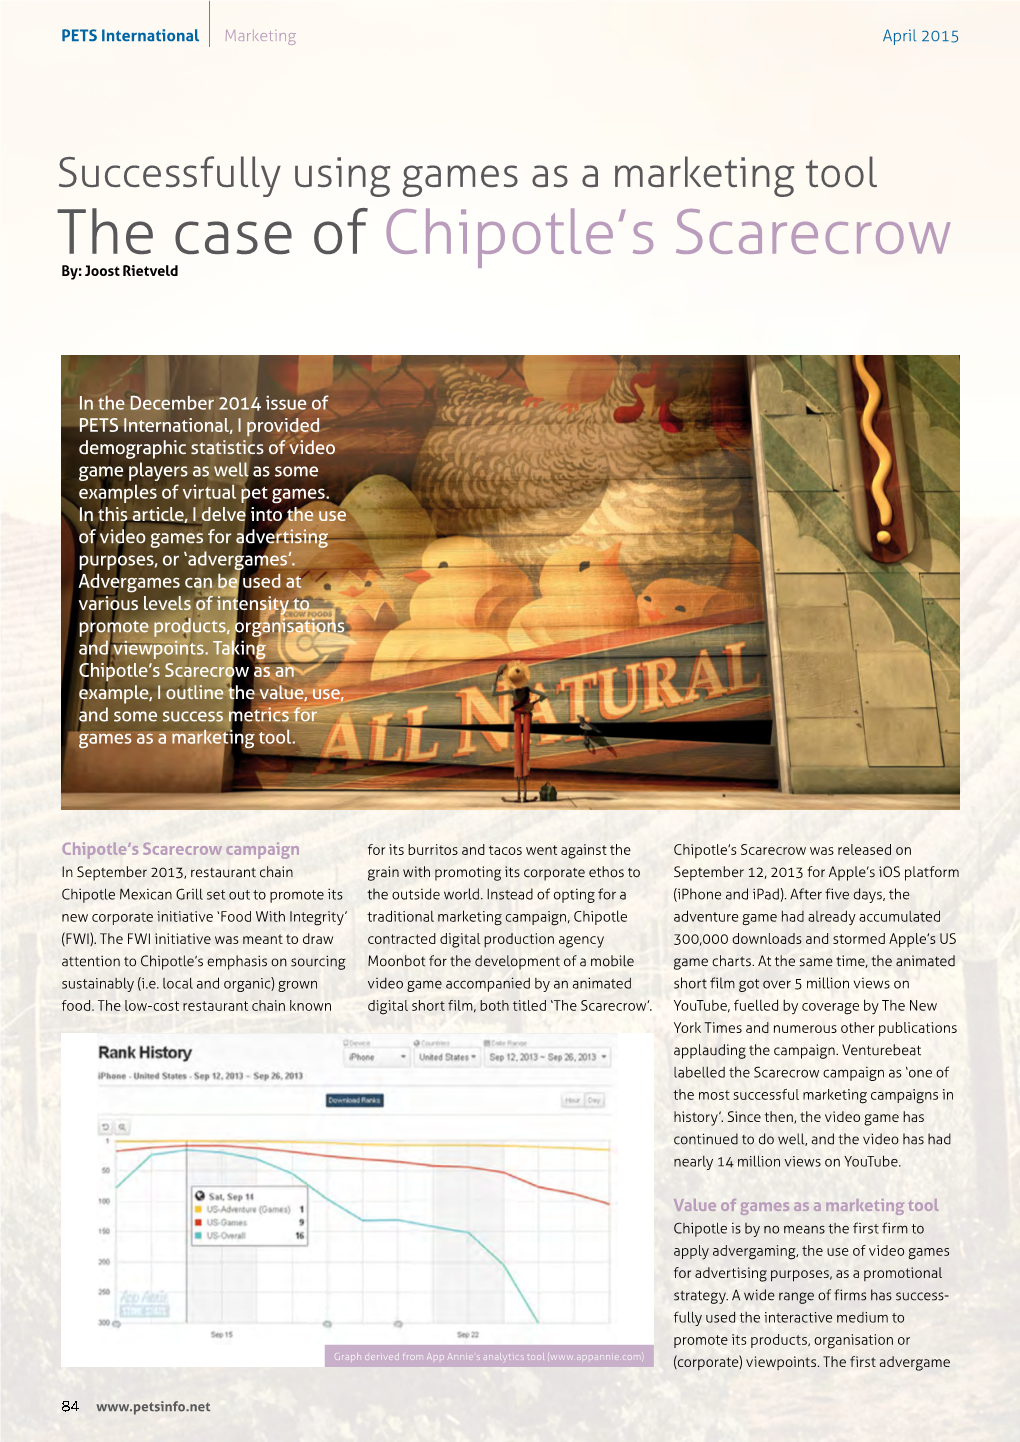 The Case of Chipotle's Scarecrow